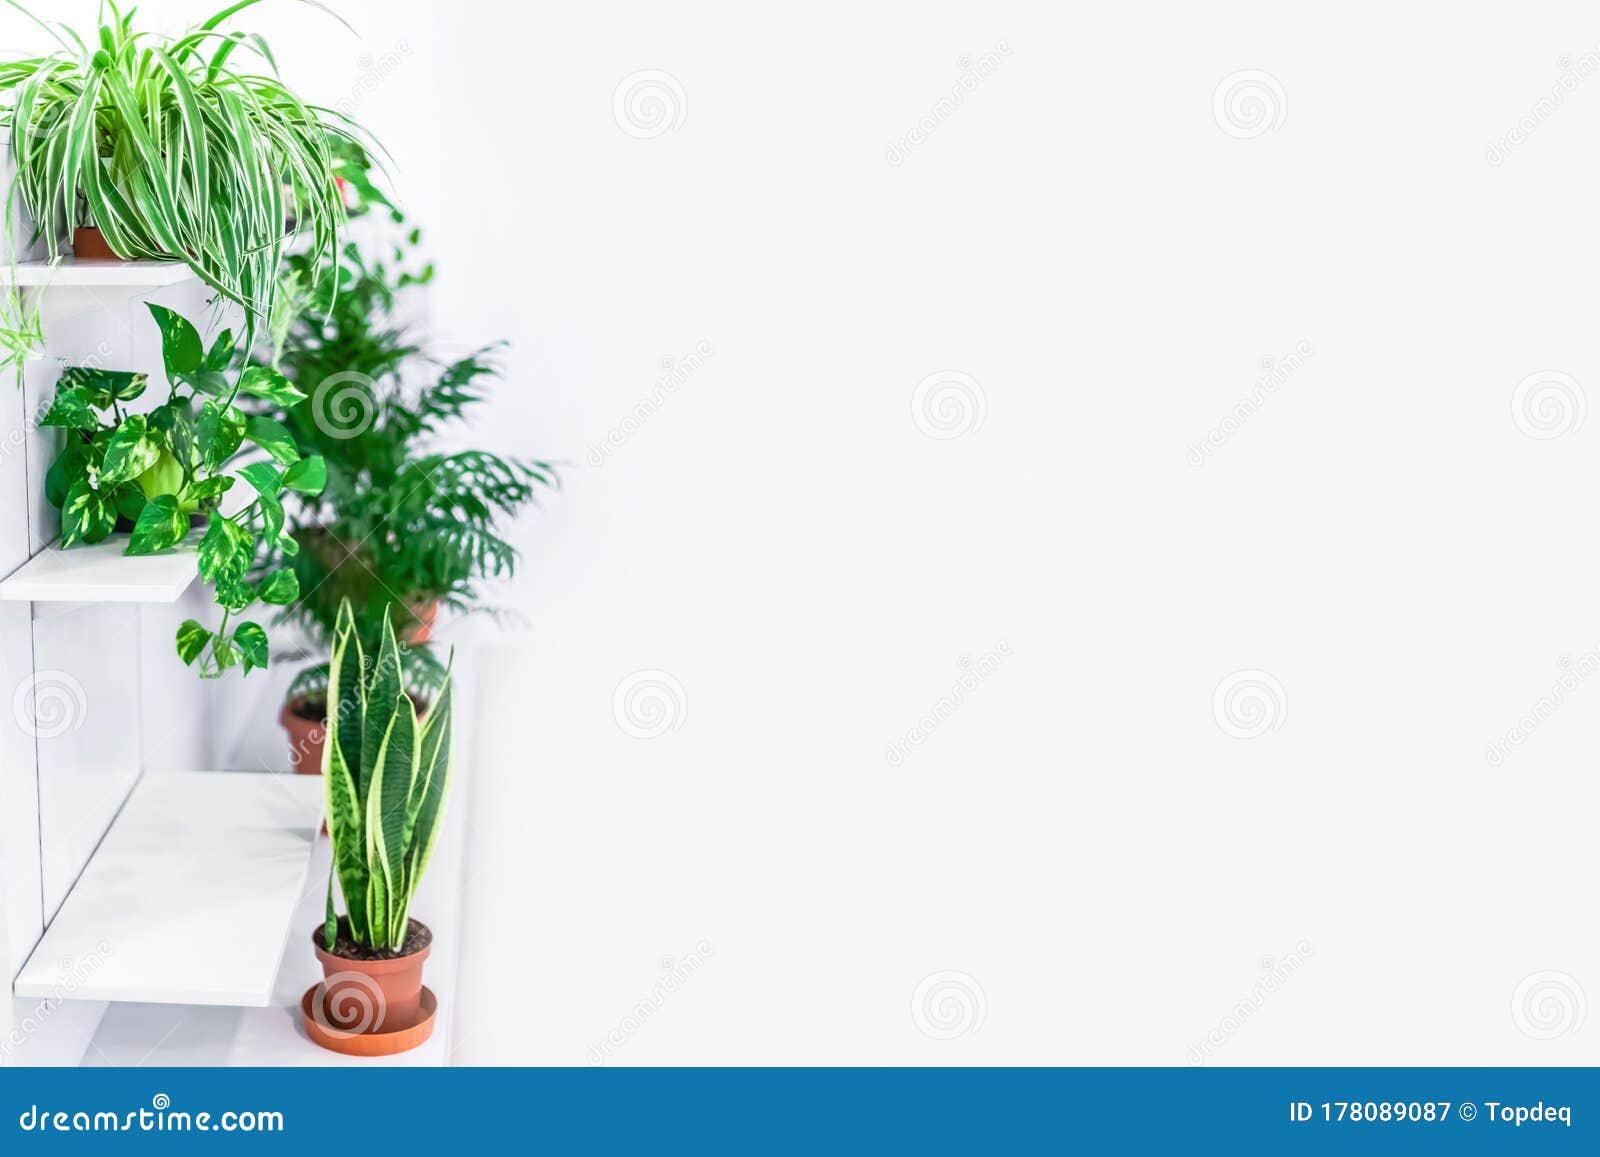 Green Plants Home Decoration on White Background Stock Image - Image of  design, flora: 178089087